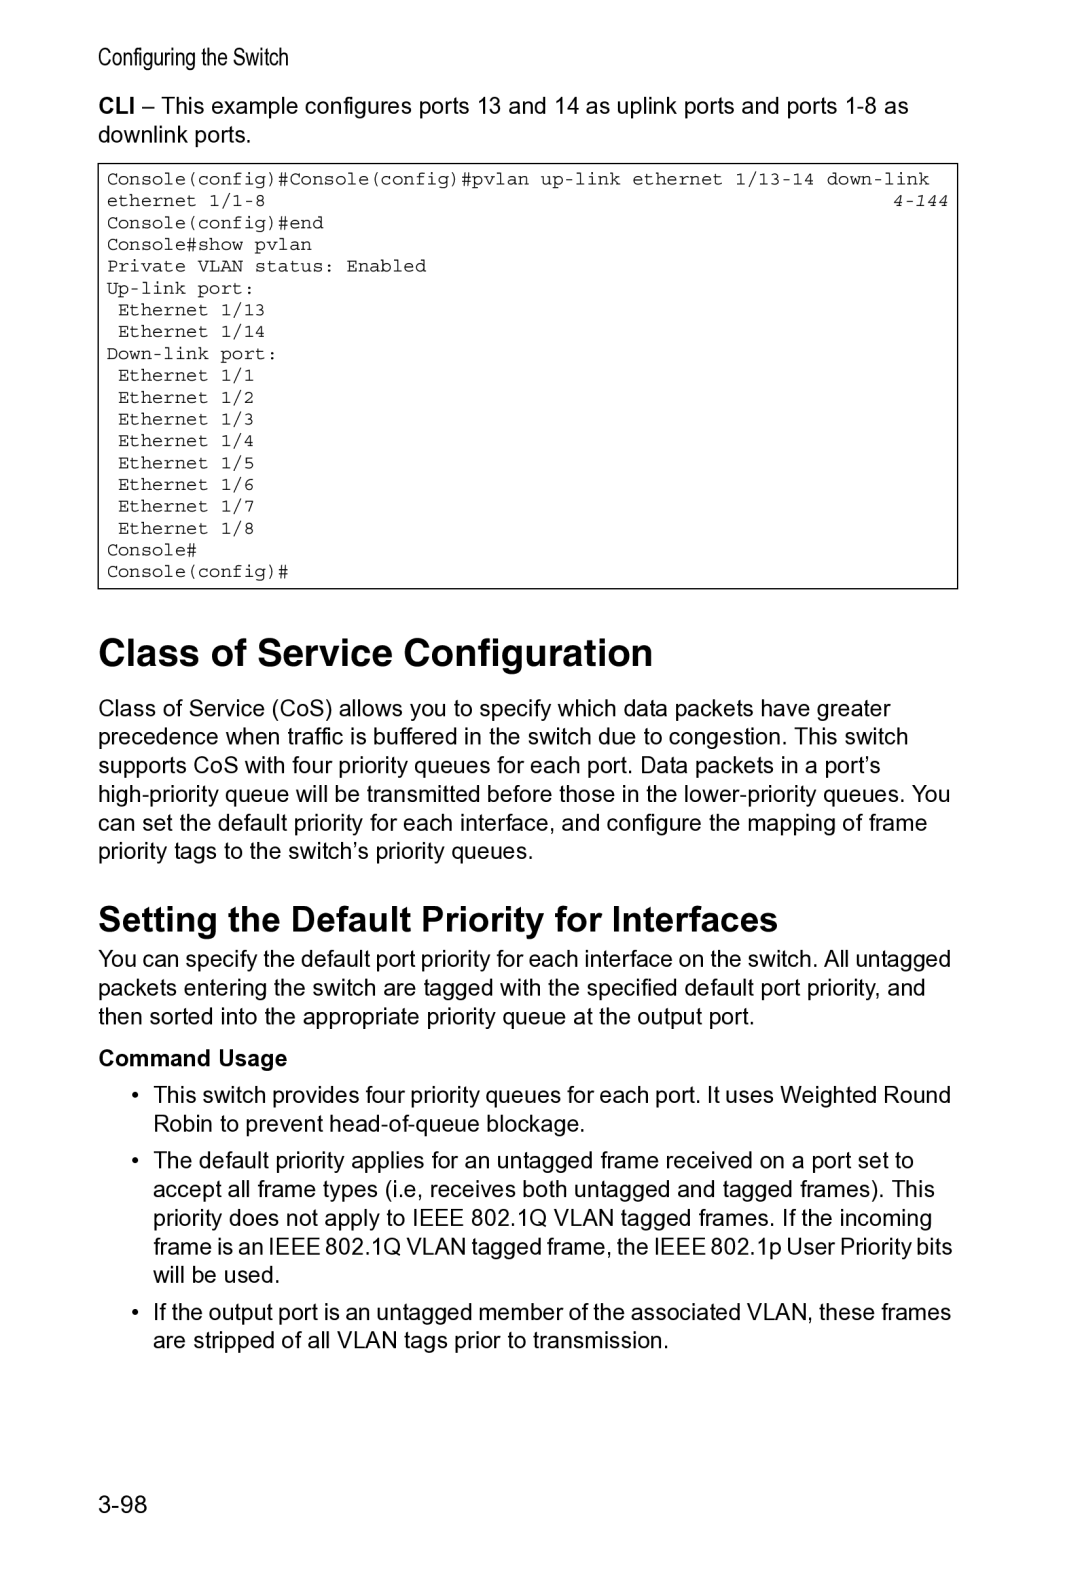 Accton Technology VS4512DC manual Class of Service Configuration, Setting the Default Priority for Interfaces 